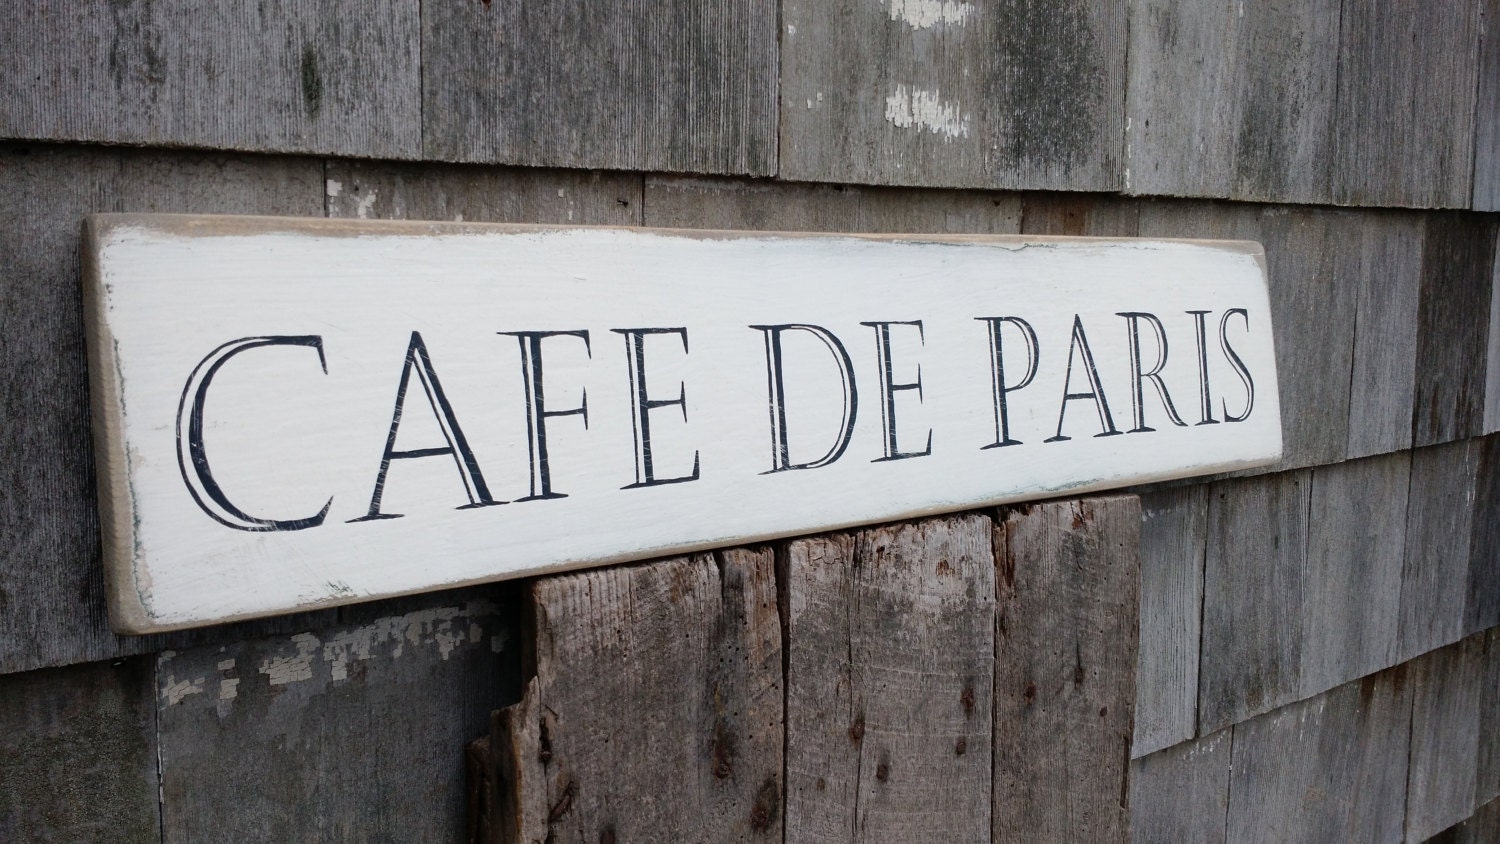  Cafe  de  Paris  french sign  on reclaimed pine wood hand painted